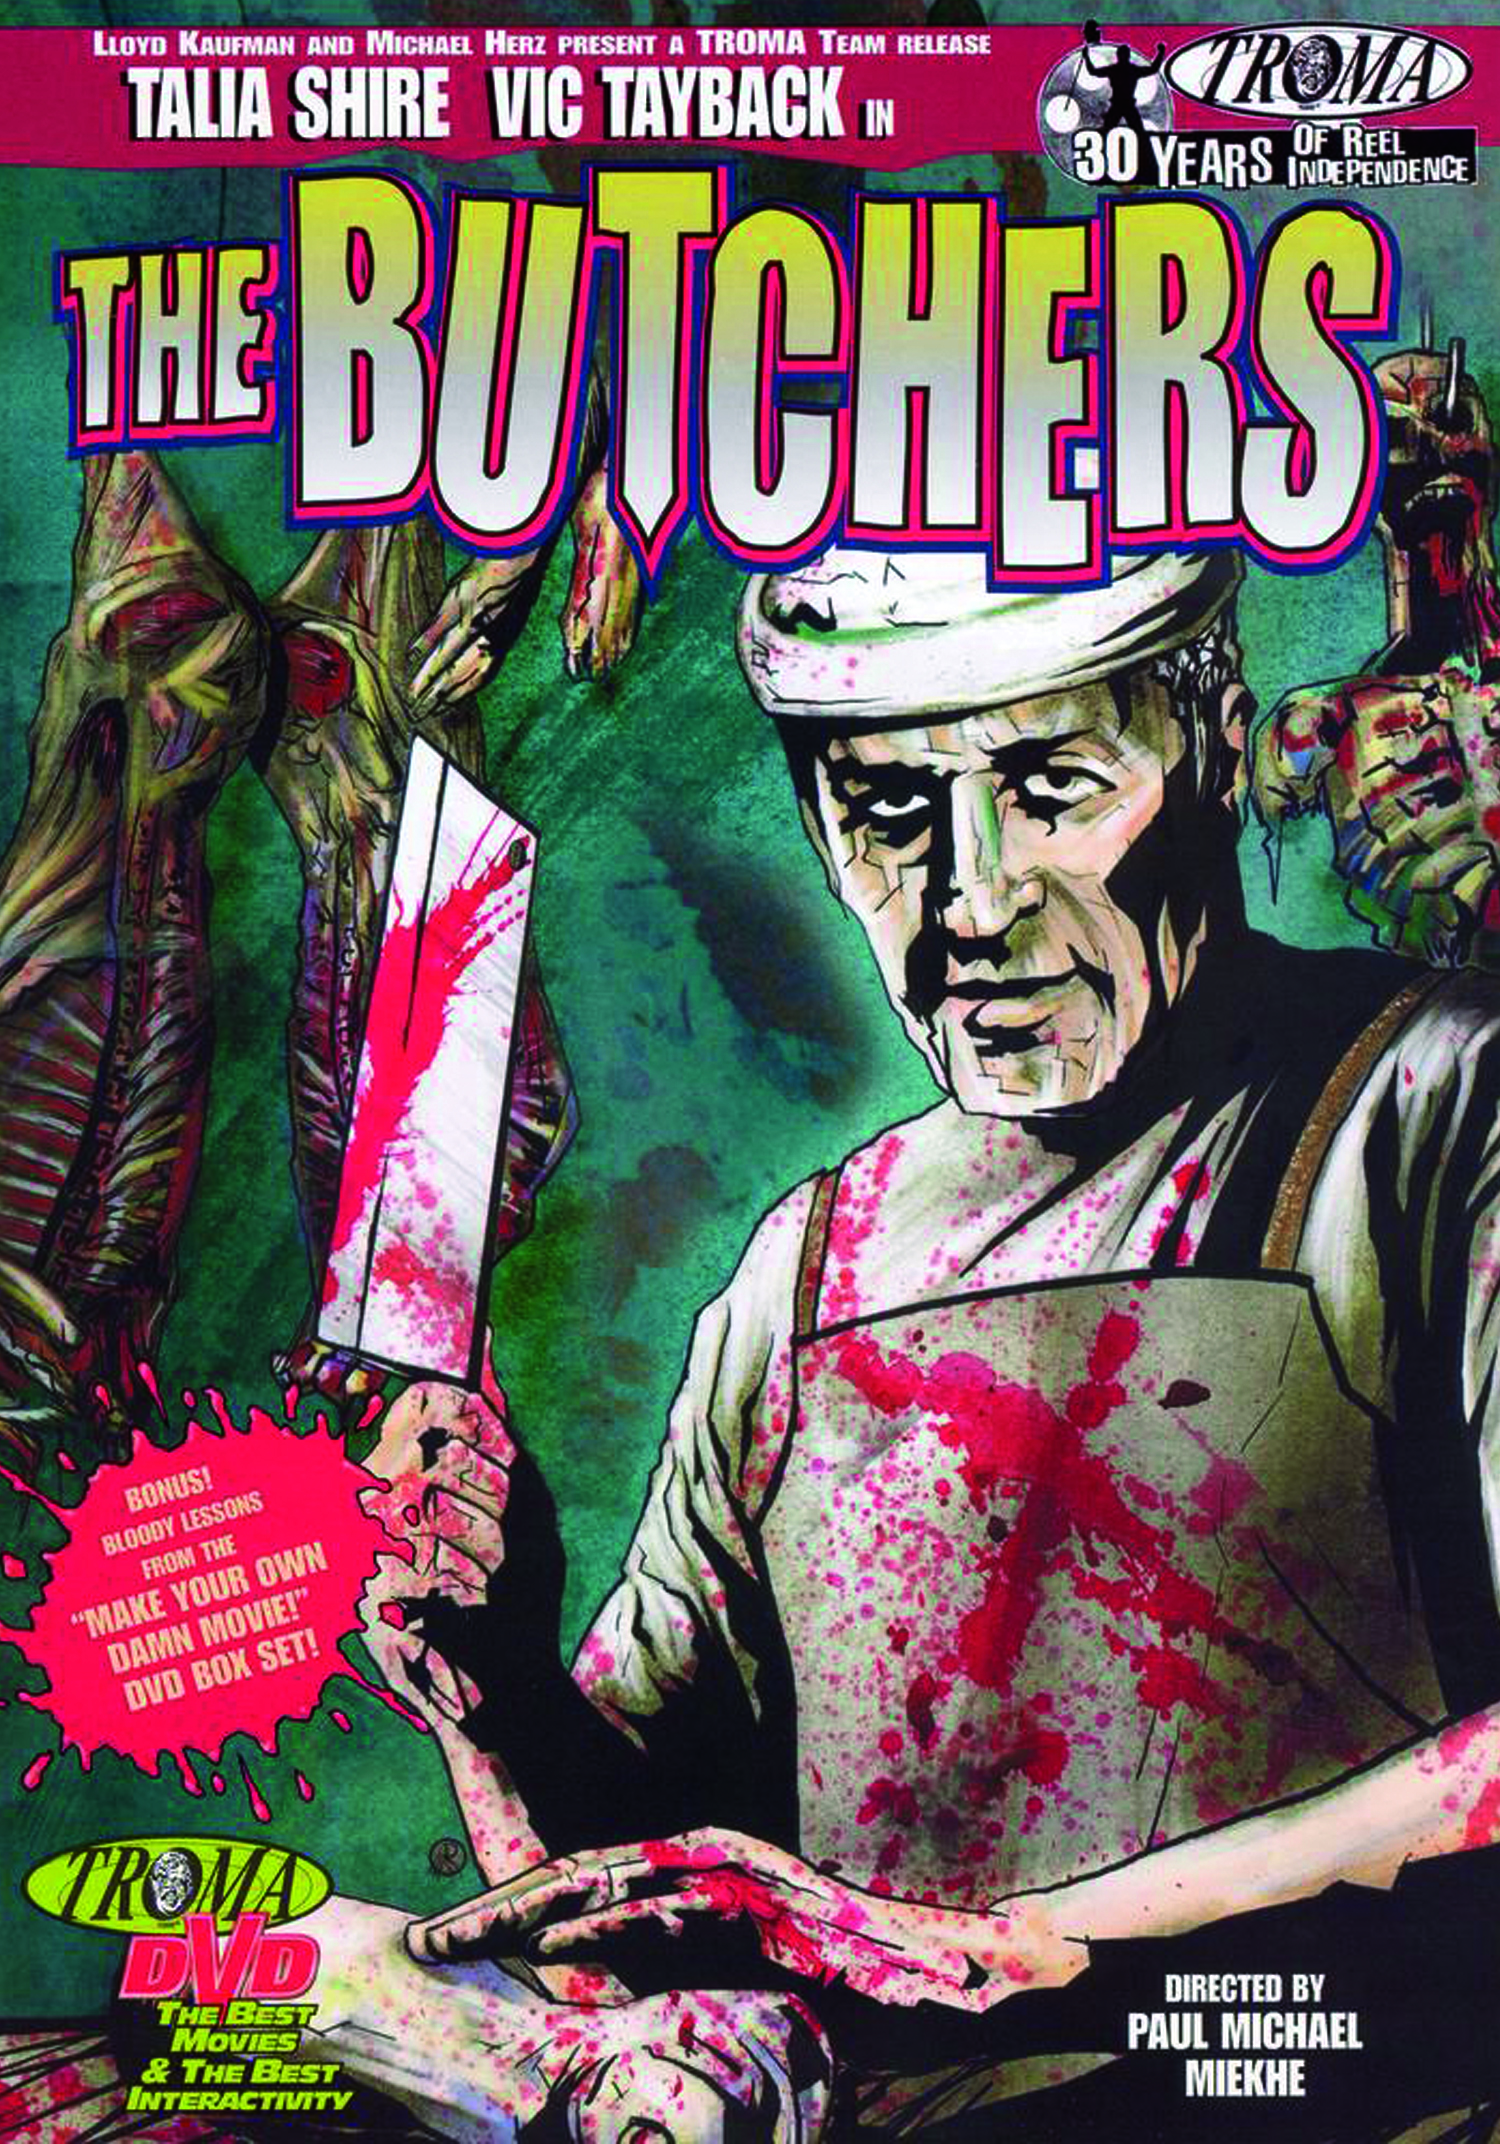 the butcher